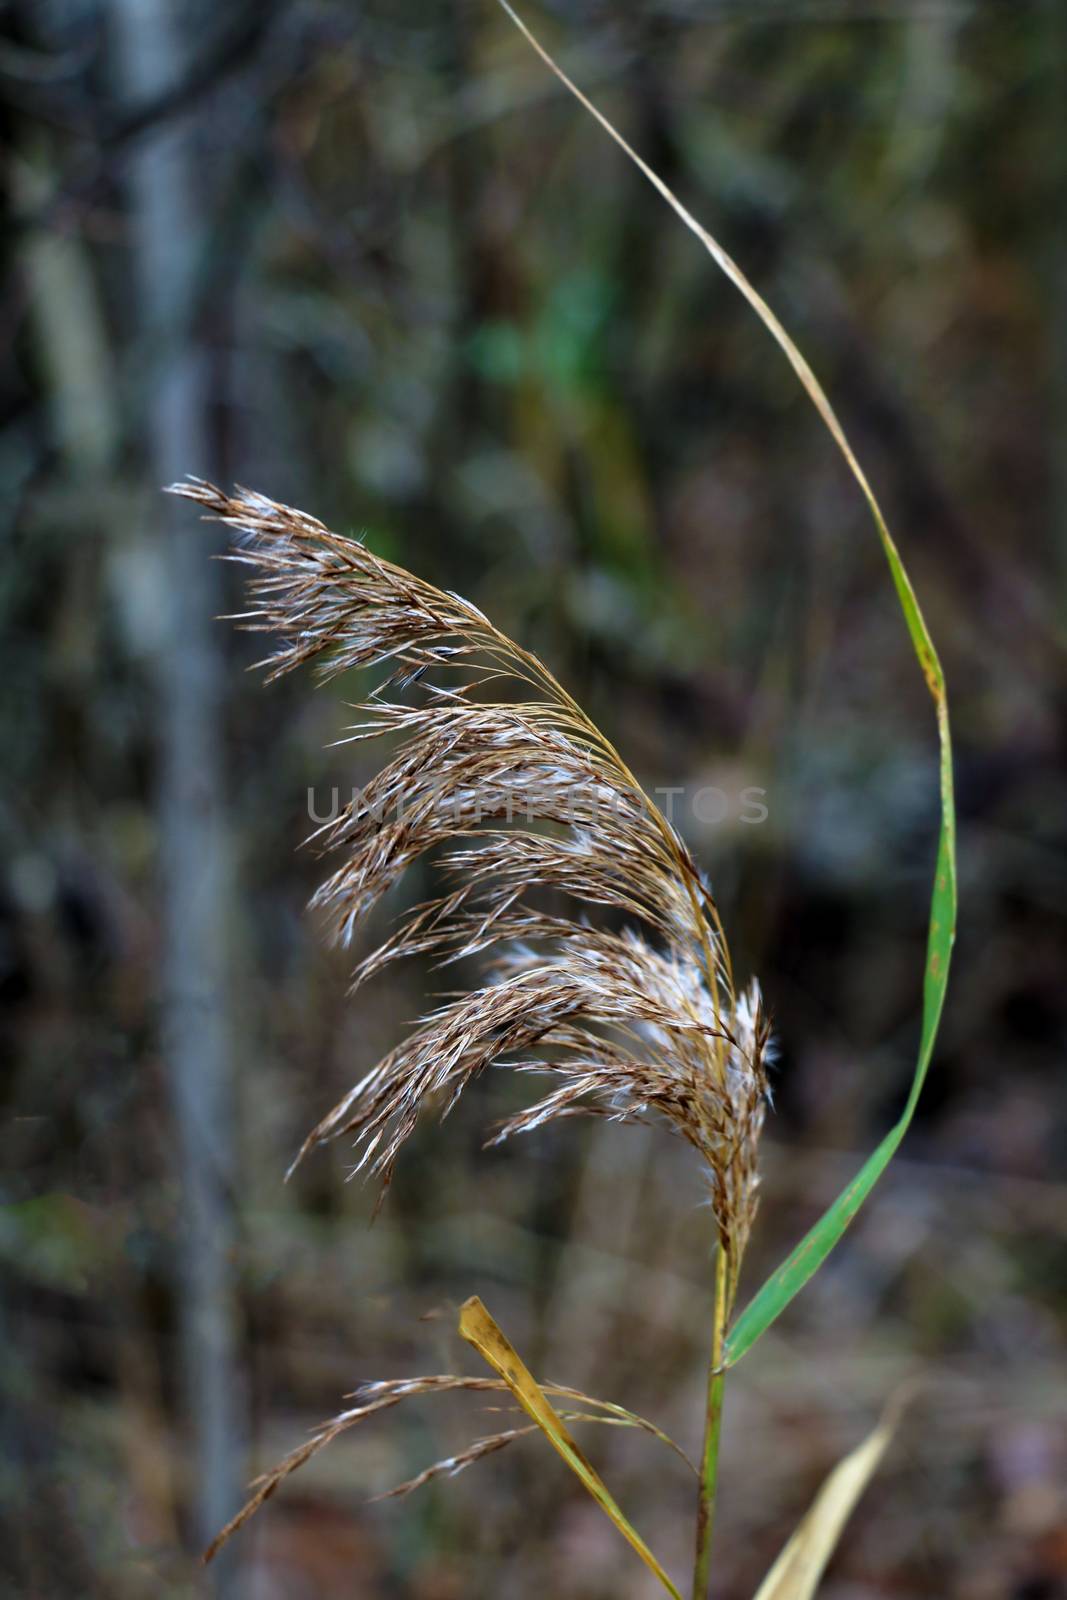 Beautiful swamp grass, also known as schoenoplectus, bulrushes